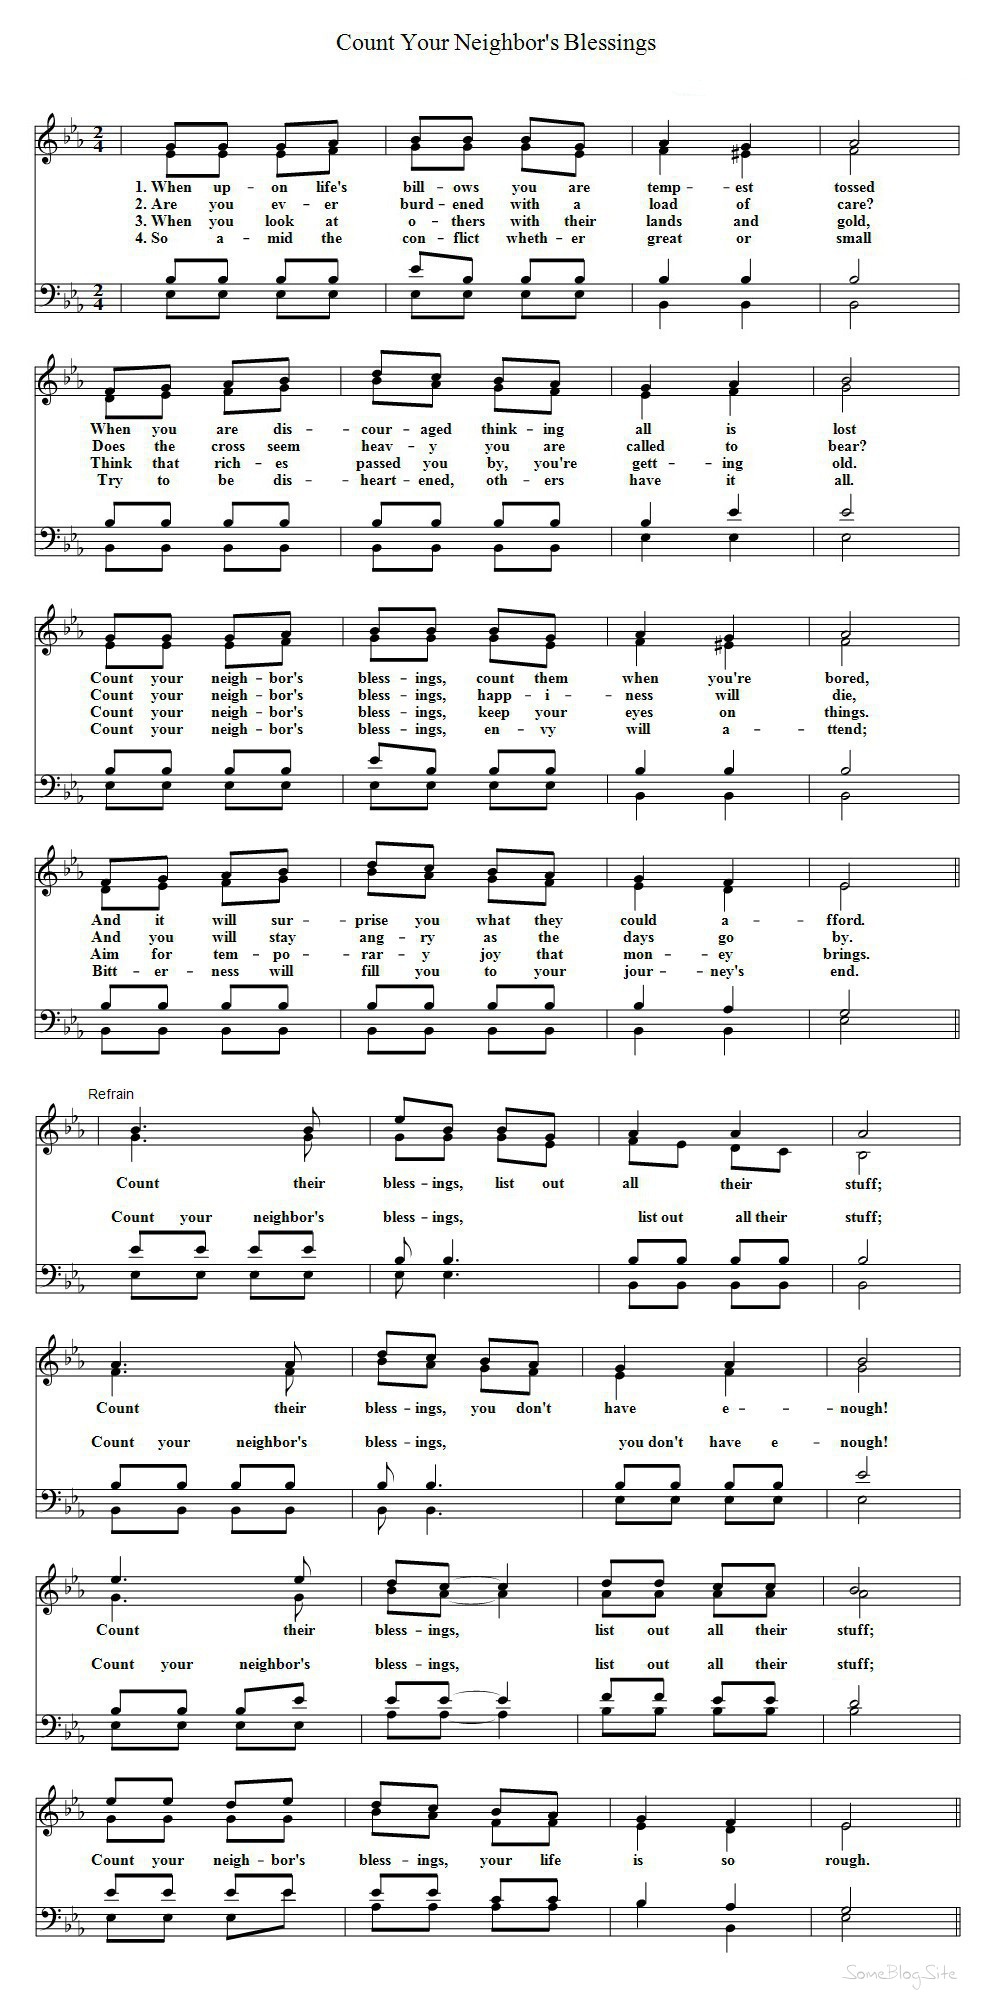 sheet music for the hymn Count Your Neighbor's Blessings, based off the old hymn Count Your Blessings